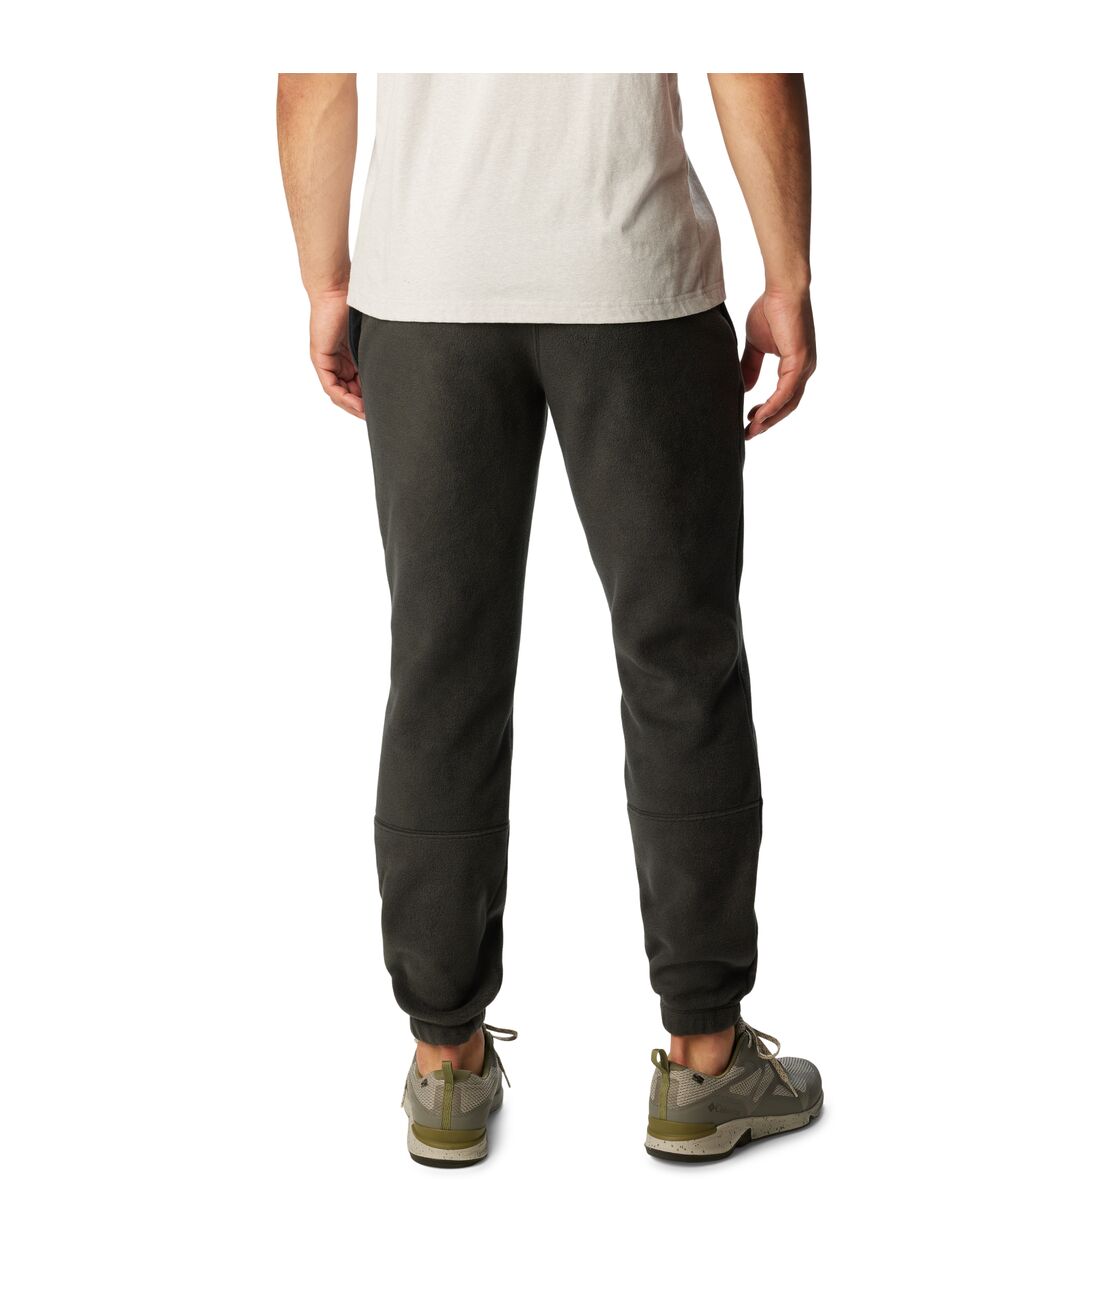 Steens Mountain Joggers